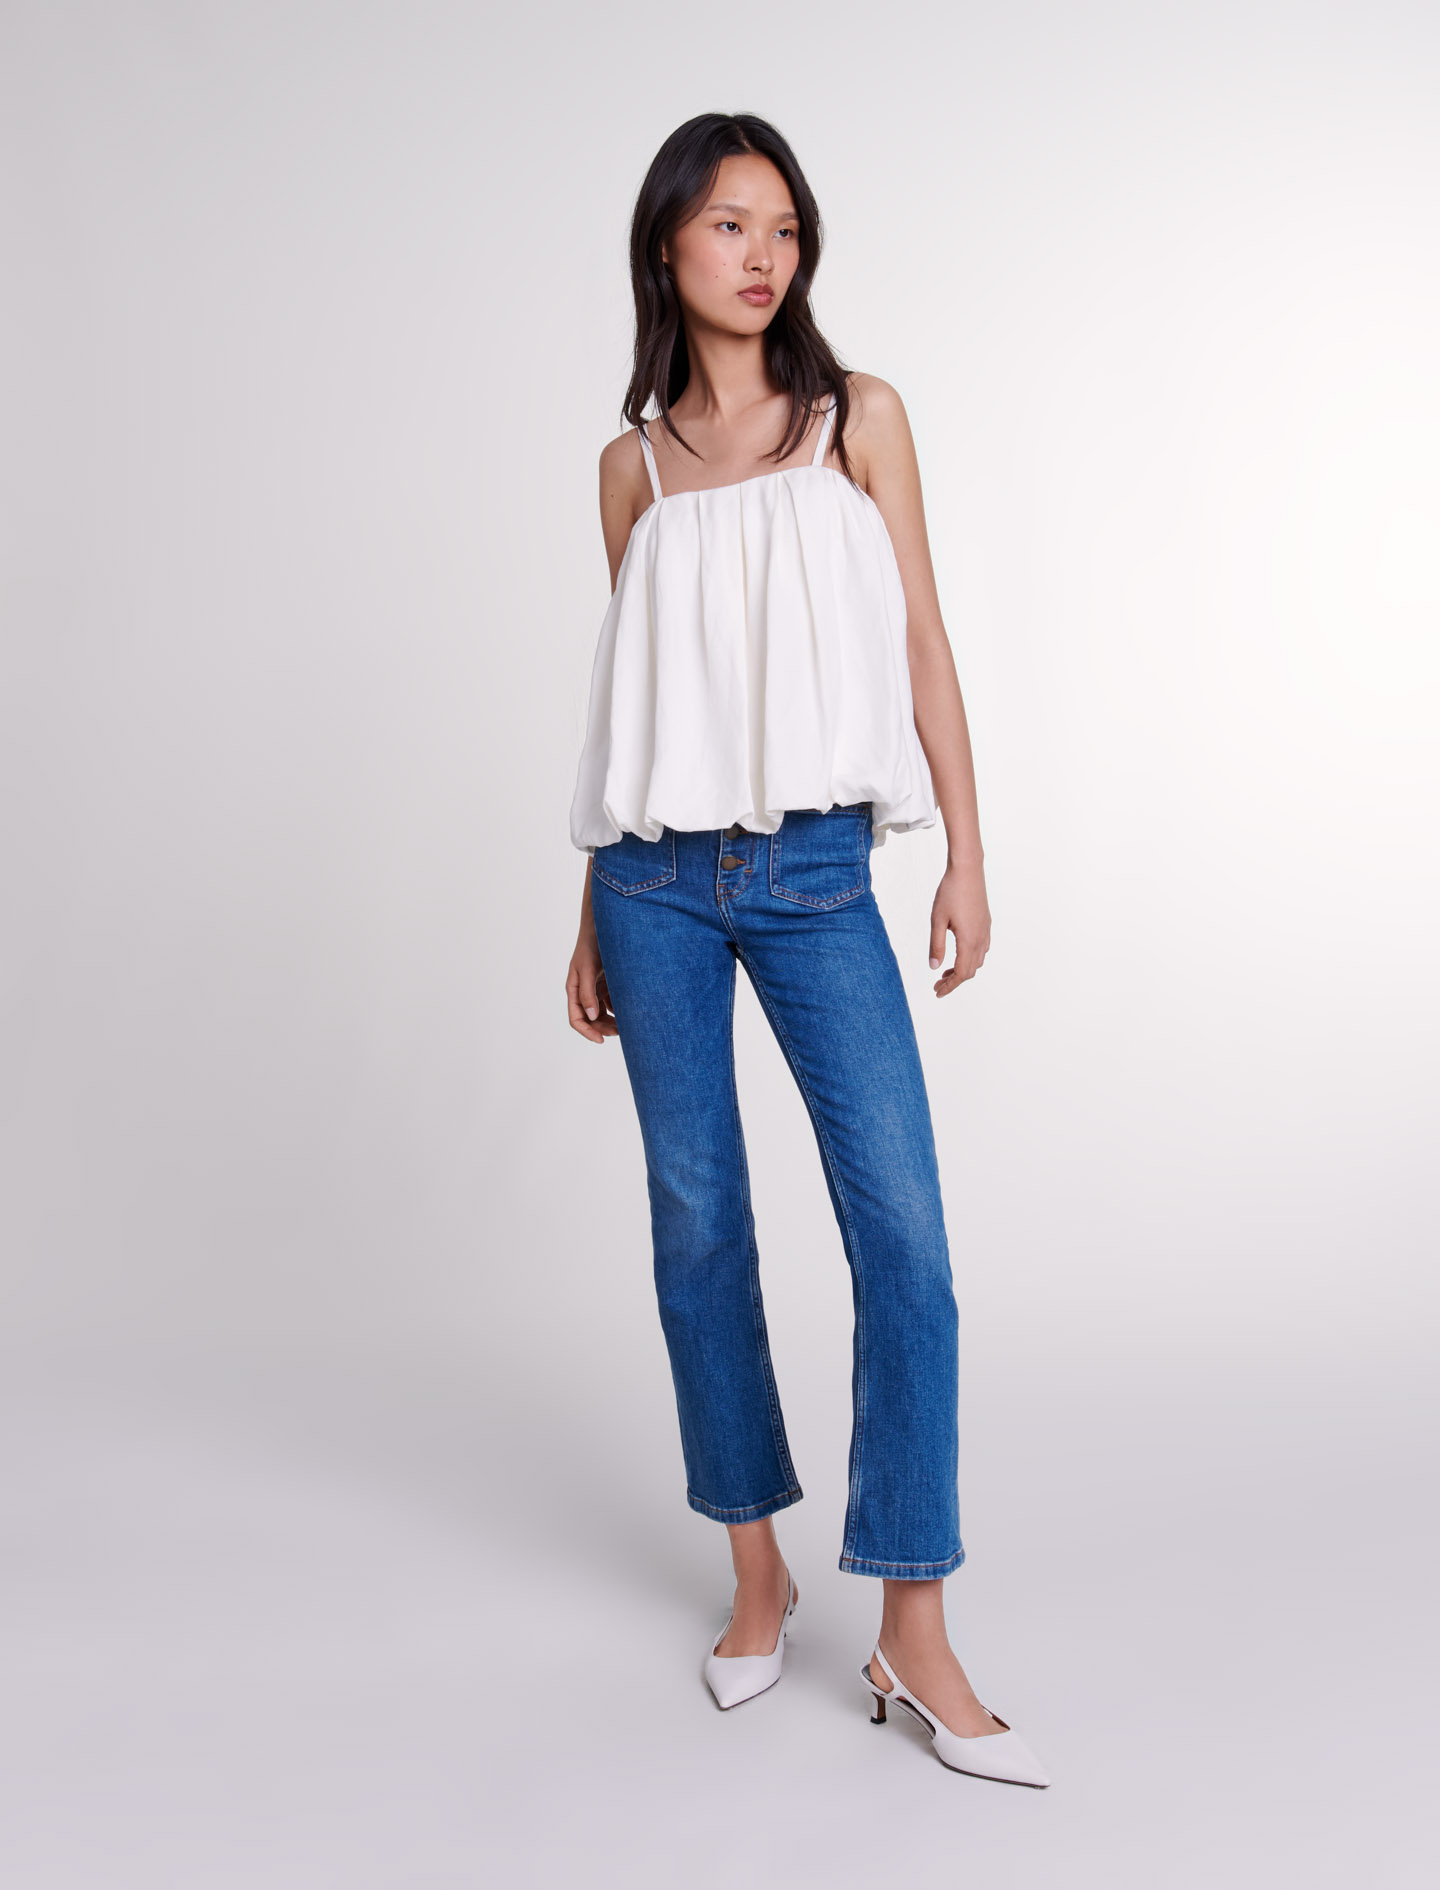 Maje Strappy Top For Fall/winter In White